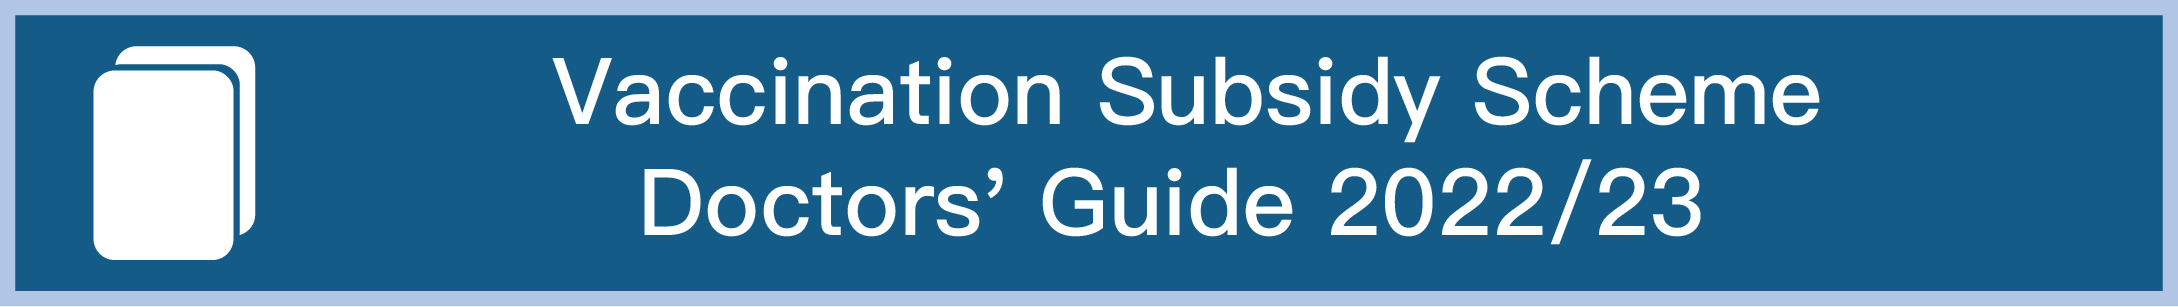 Vaccination Subsidy Scheme Doctors' Guide 2022/23